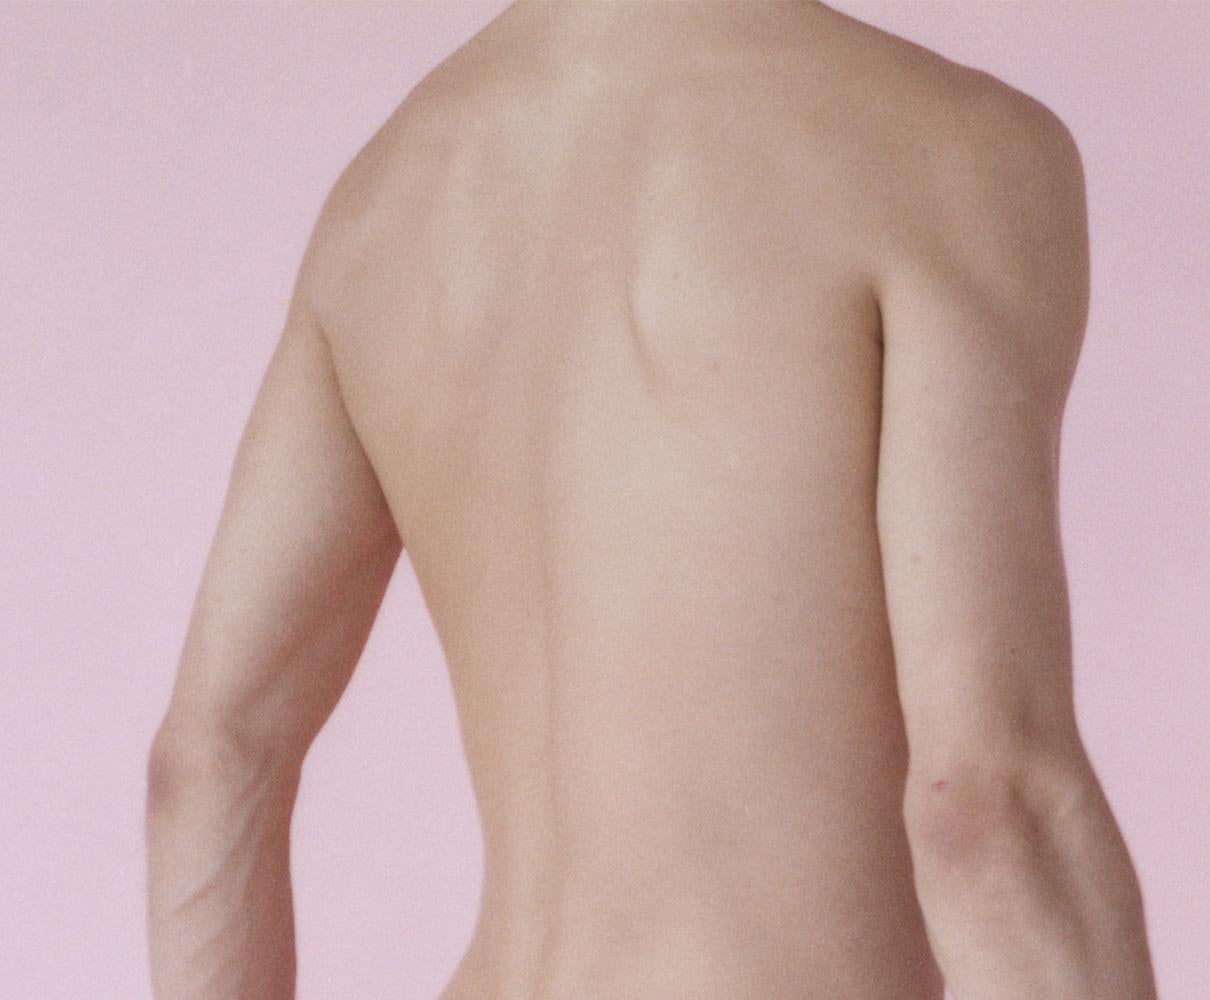 Kouros.04 Back Pink, by Michael James O’Brien
Color fiber paper 
Paper size: 24 H x 20 W inches.
Ed 4/5 + 2AP
Unframed 

Medium format color neg film
Photographed with Pentax 6 x 7 camera In natural light 
2000-2002
_________________

Michael James